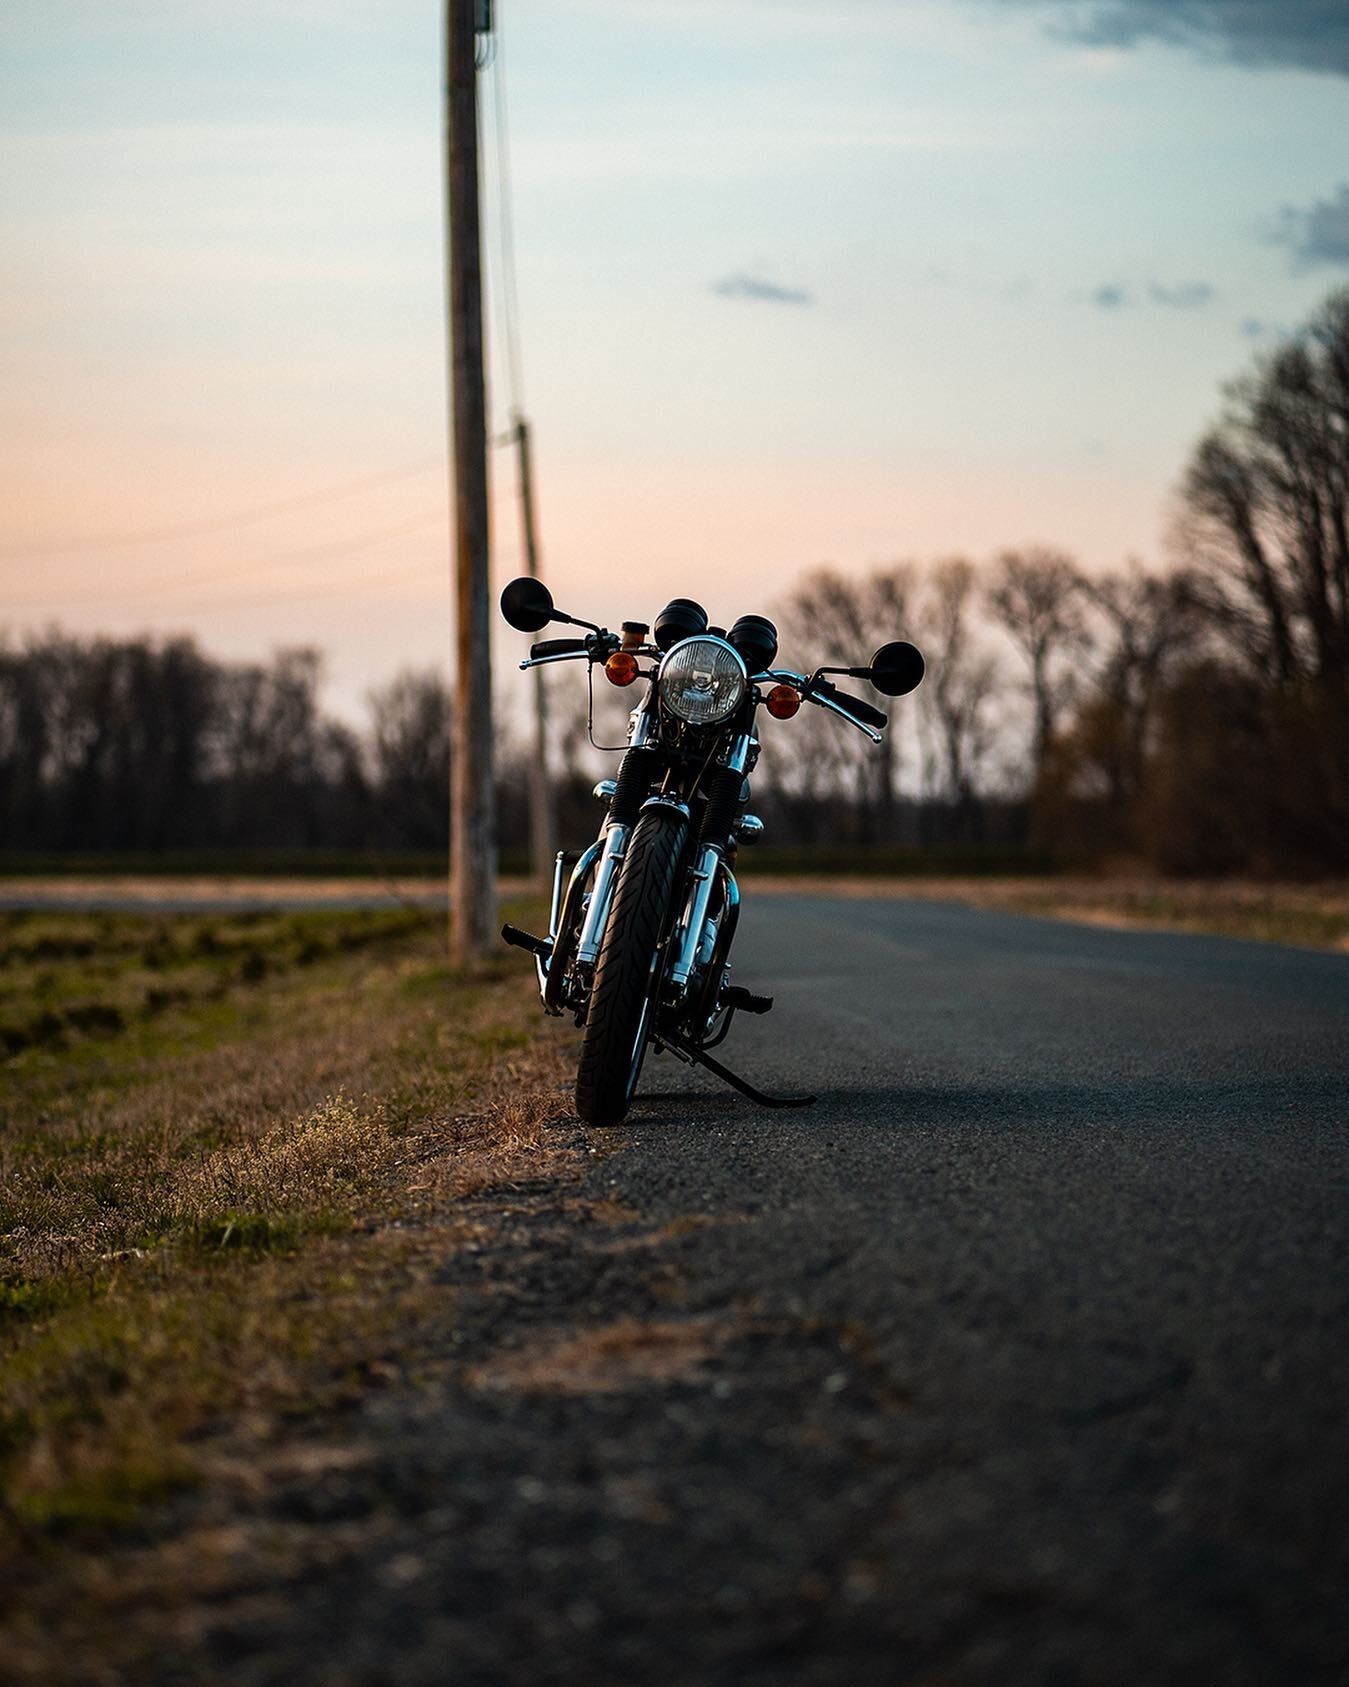 That quiet moment when you realize it&rsquo;s just you and your bike.